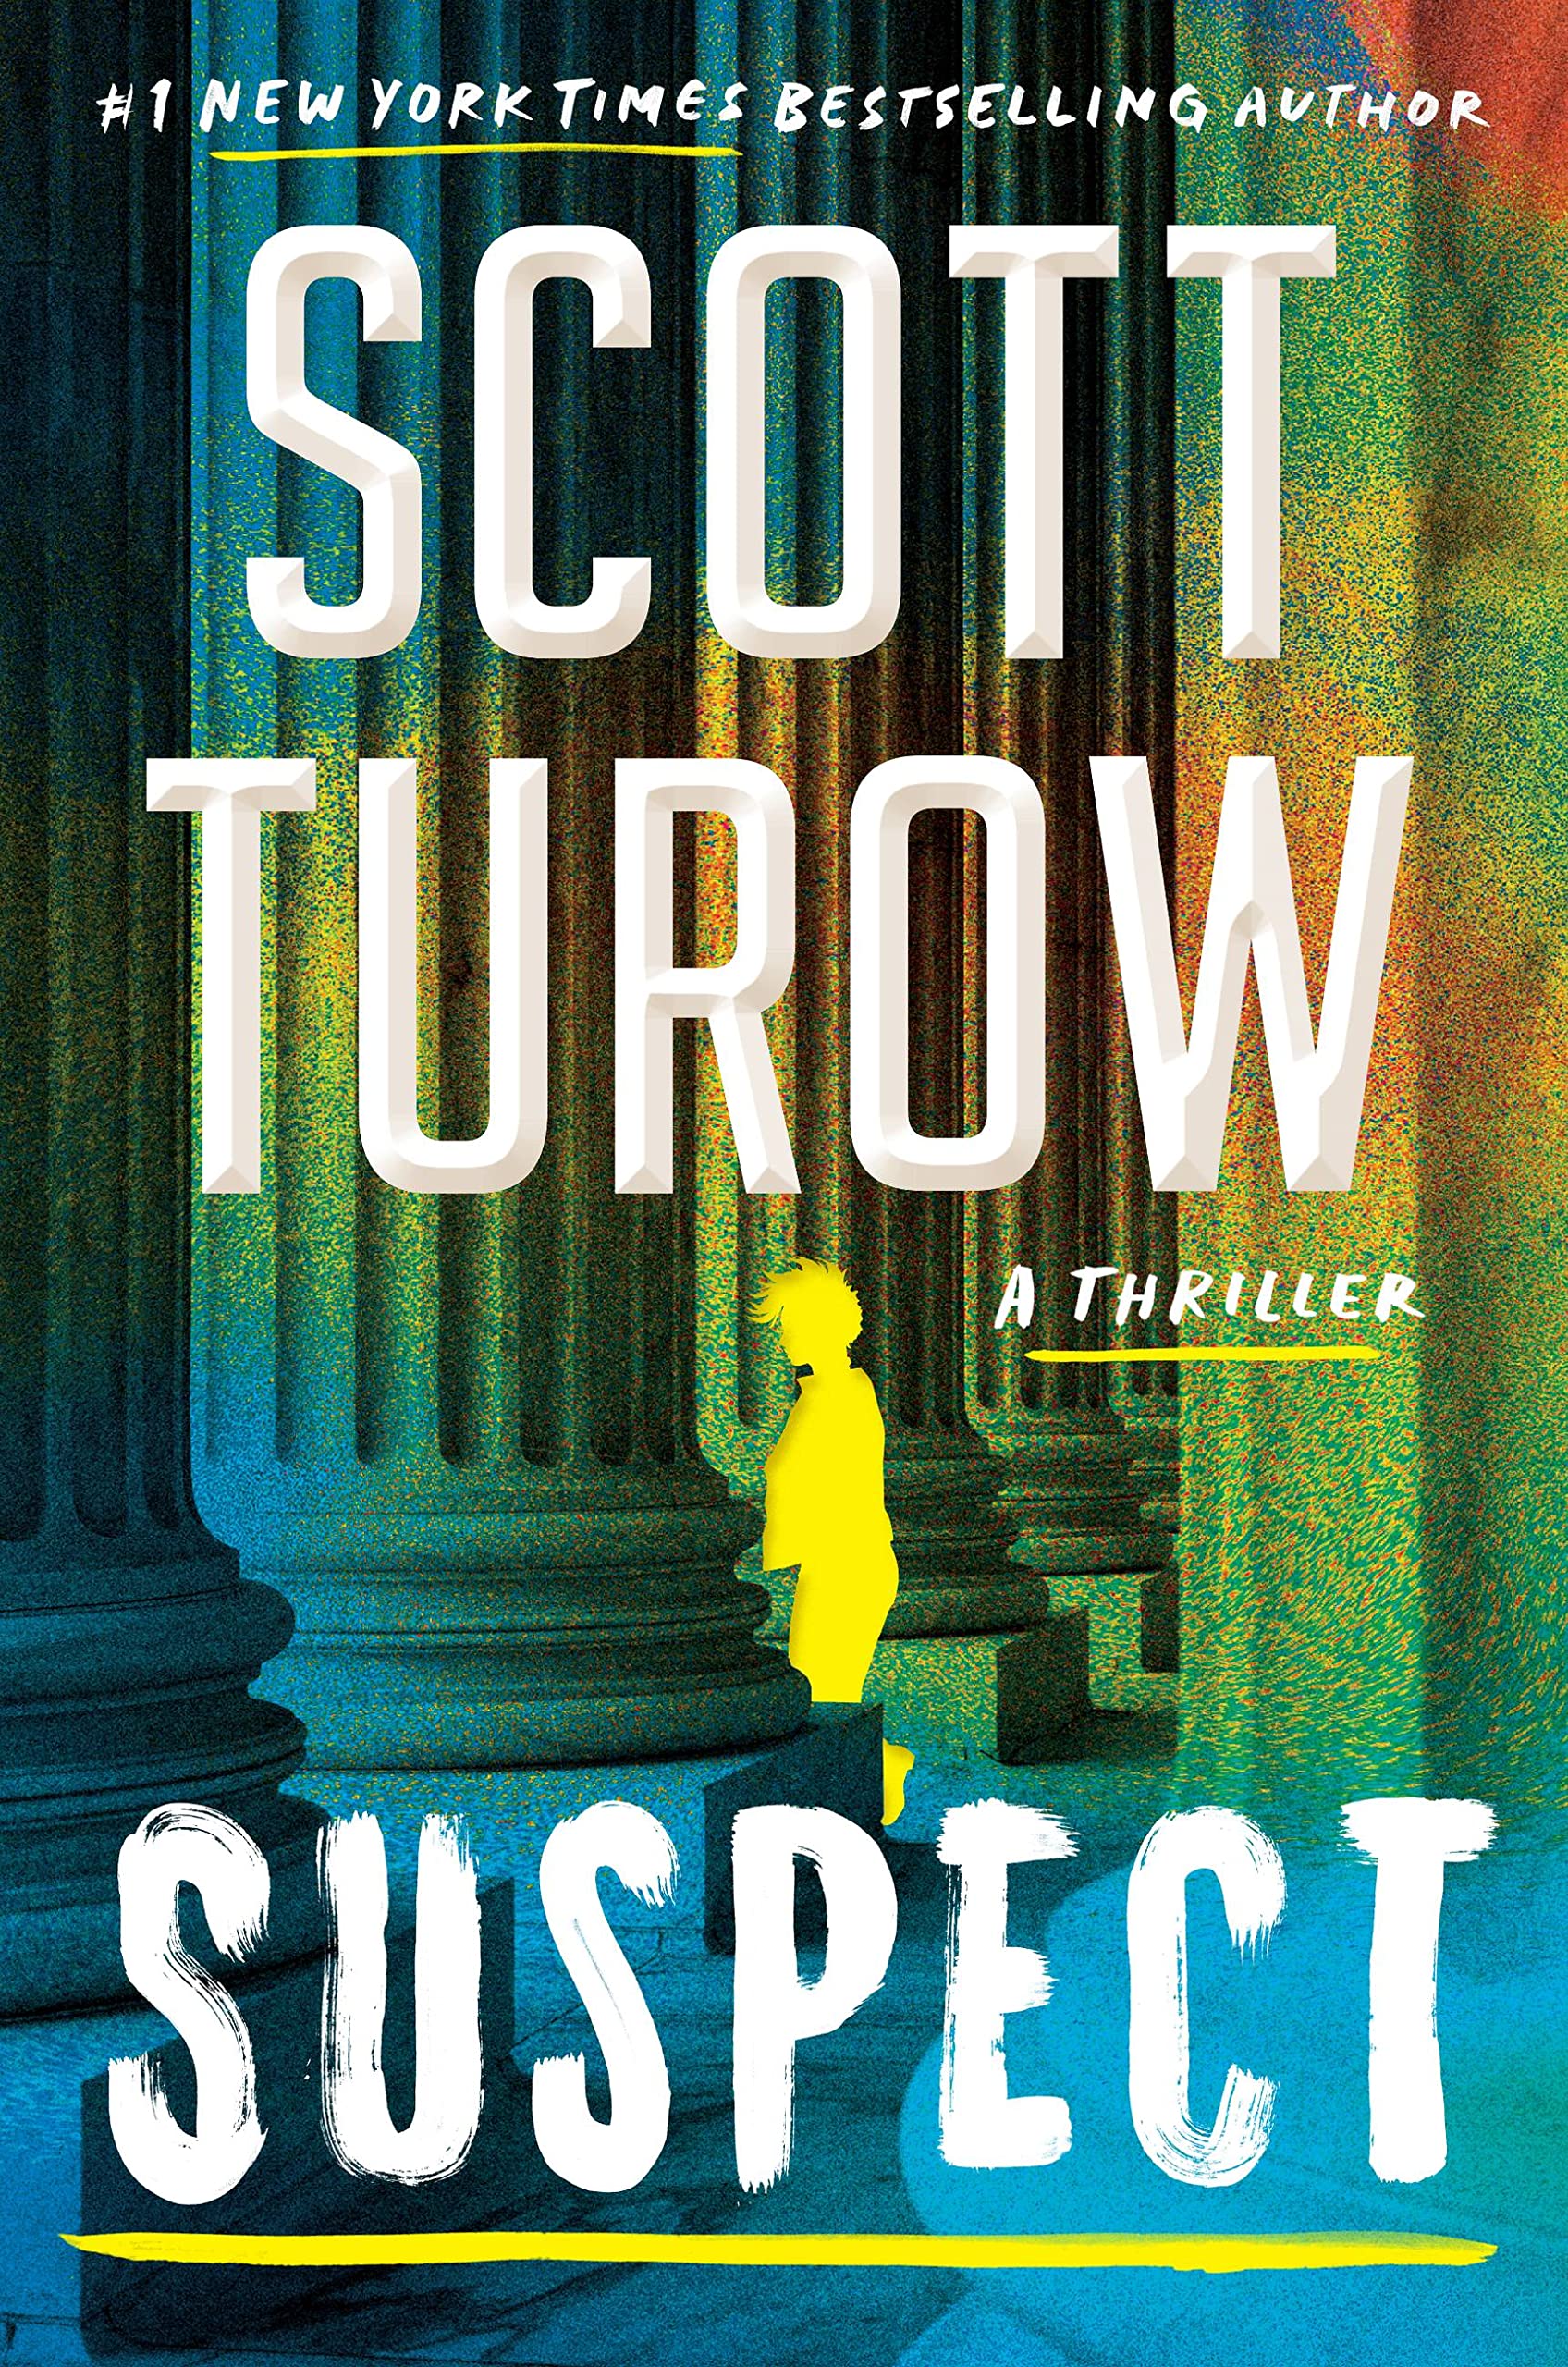 In-Person Event with Scott Turow/Suspect